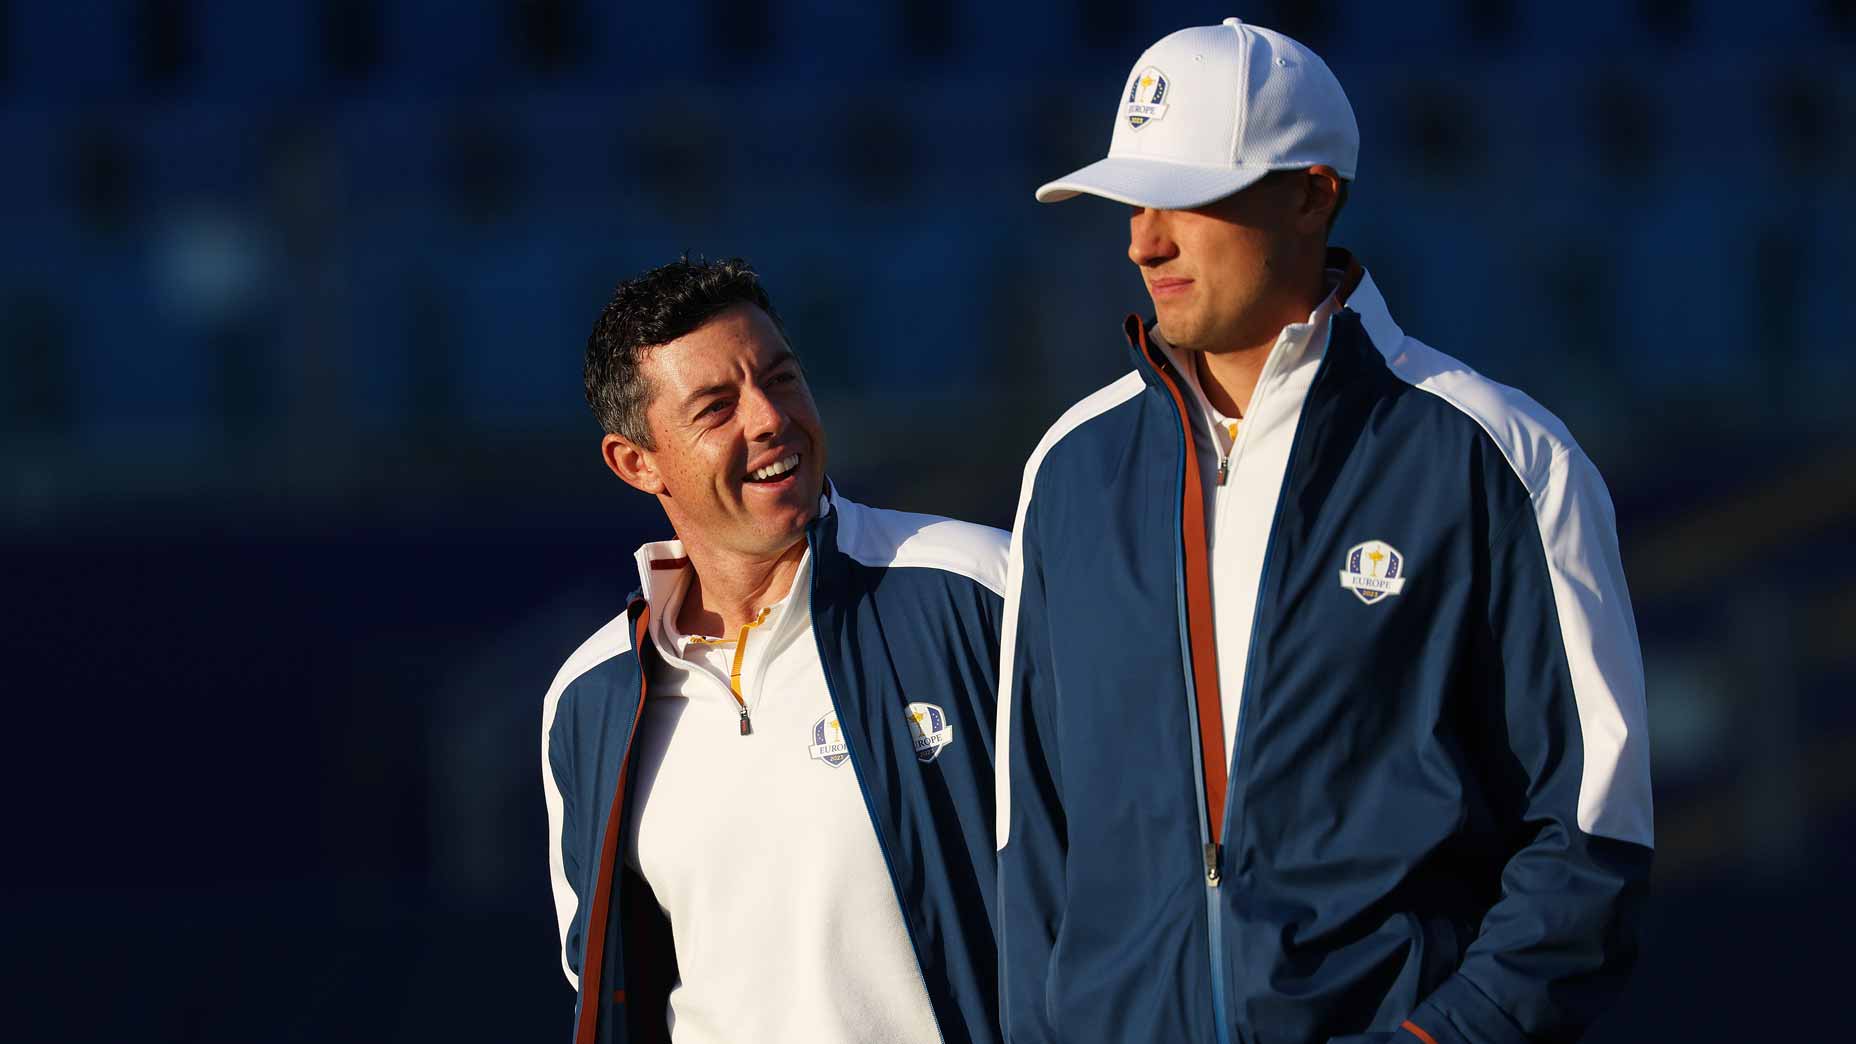 Rory McIlroy and Ludvig Aberg are among those making this a different type of European team.